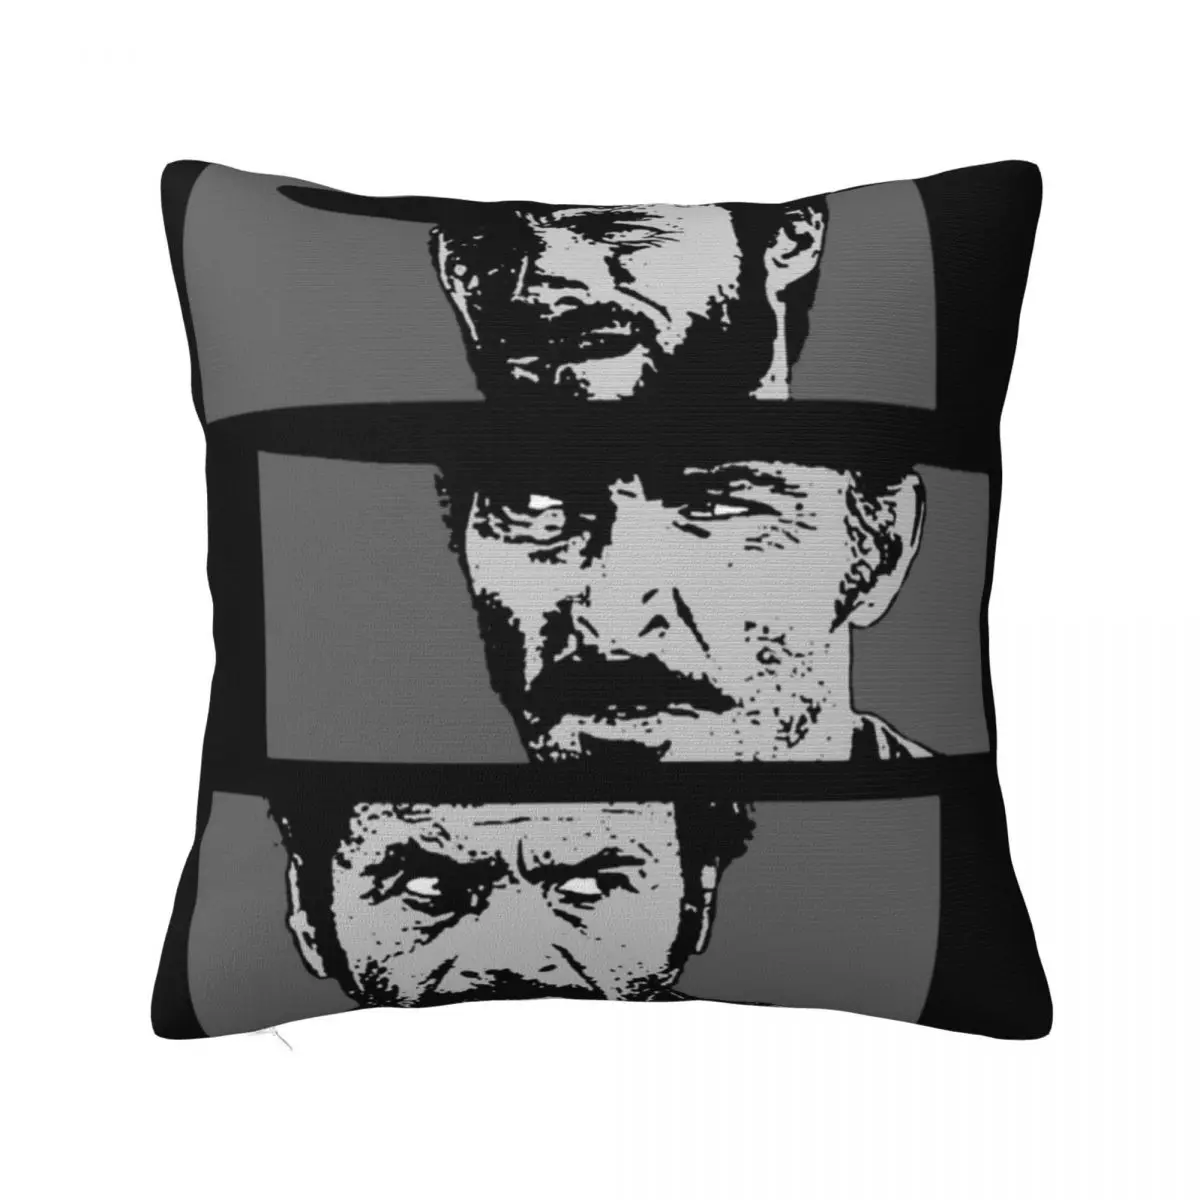 

Blondie Angel Eyes Tuco Faces Pillowcase Polyester Cushion Cover Decor The Good The Bad The Ugly Pillow Case Cover Seat 40cm